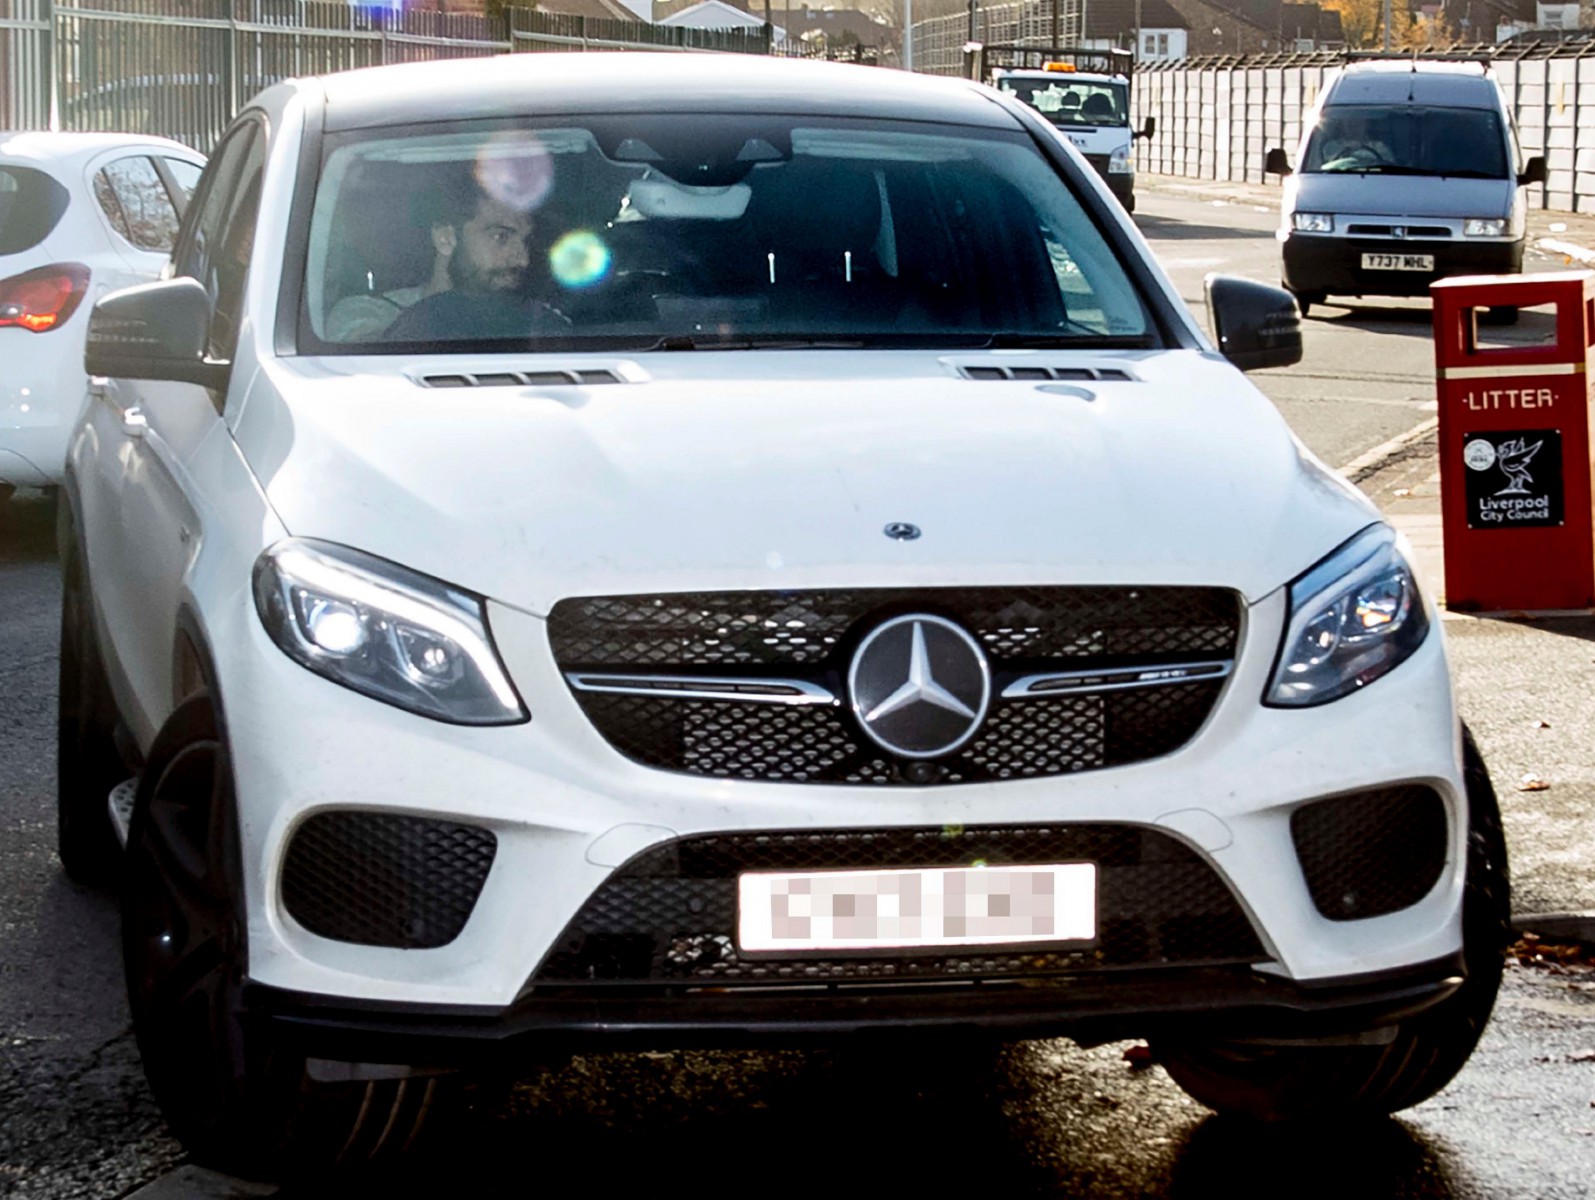 Salah often drives his Mercedes-Benz SUV to Melwood training centre